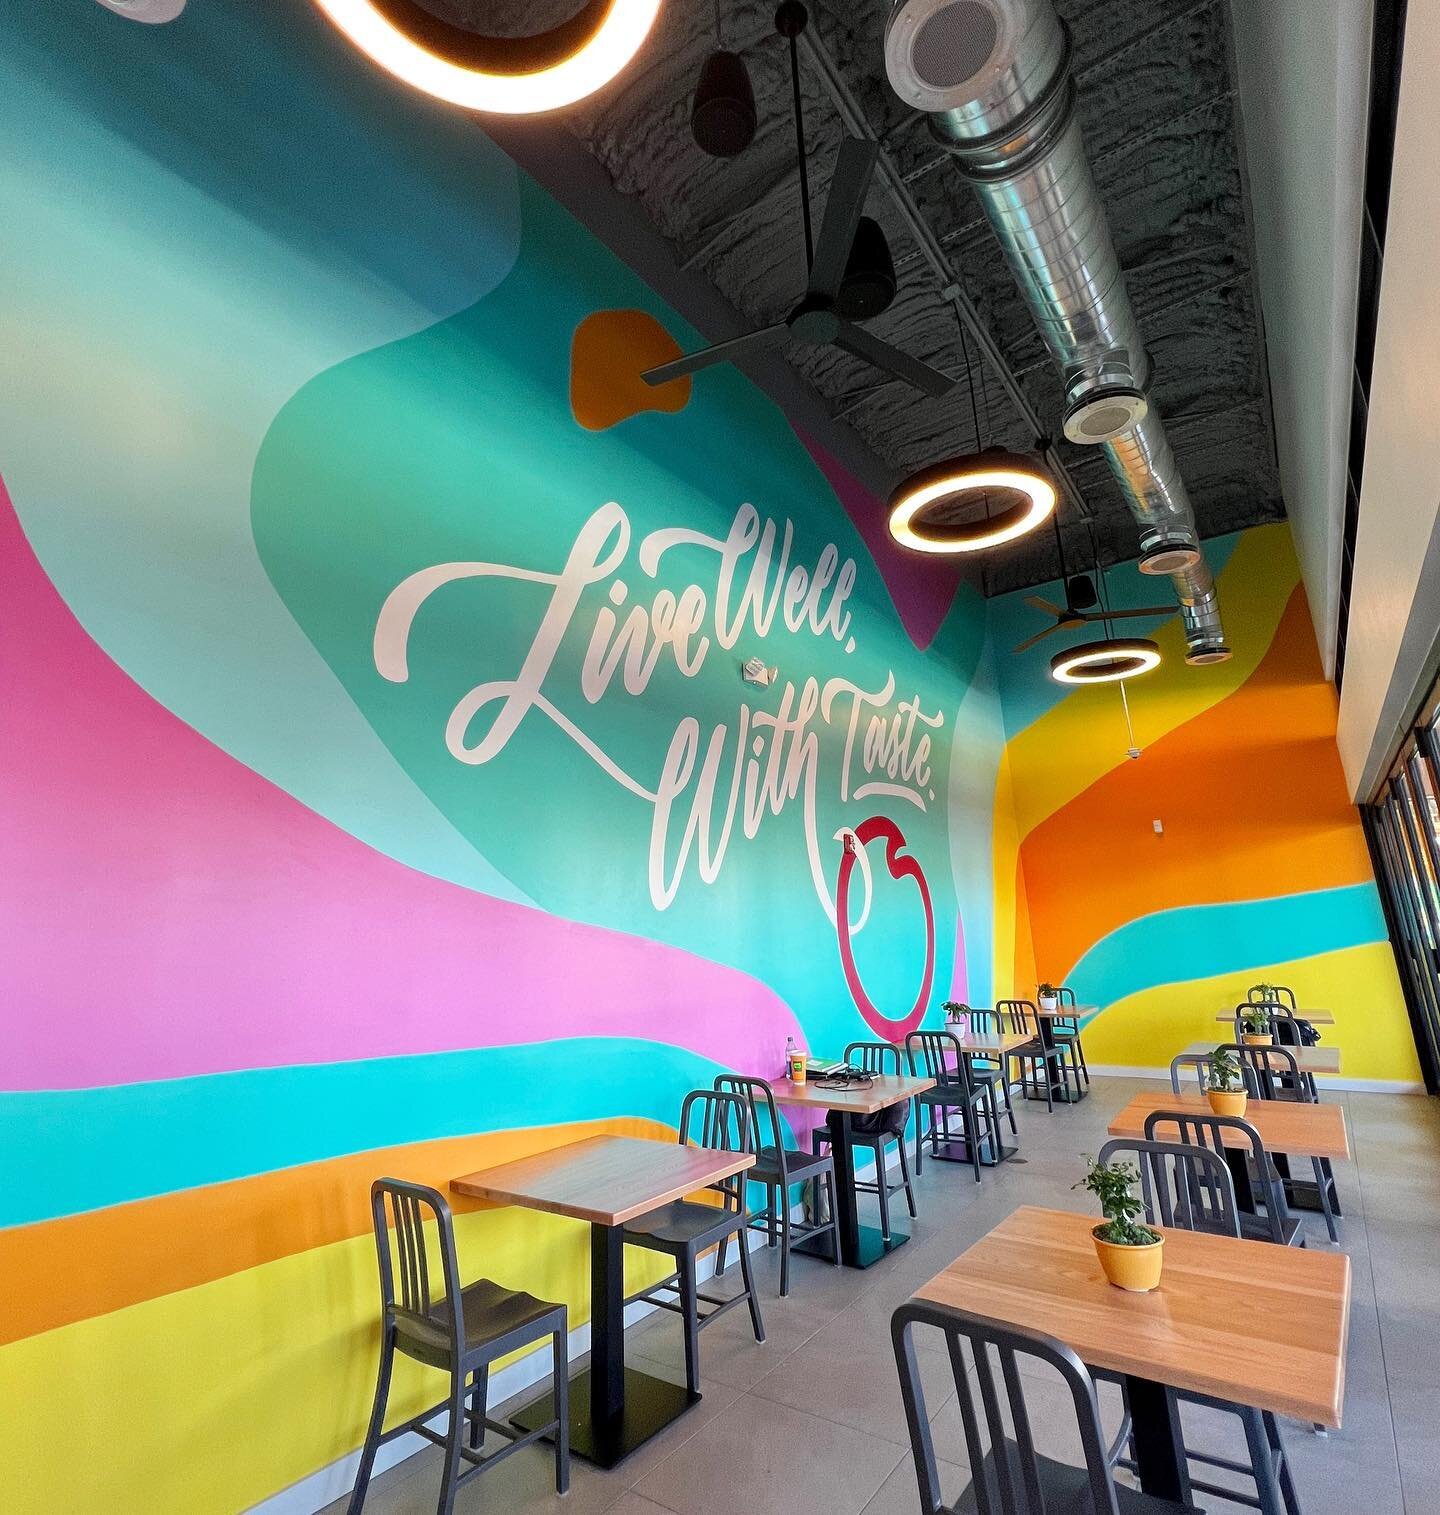 Swipe to see the grand reveal of our most recent murals at @plummarket in Aventura. #mural #miamimural #painting #colorfulwaves #abstract #lettering